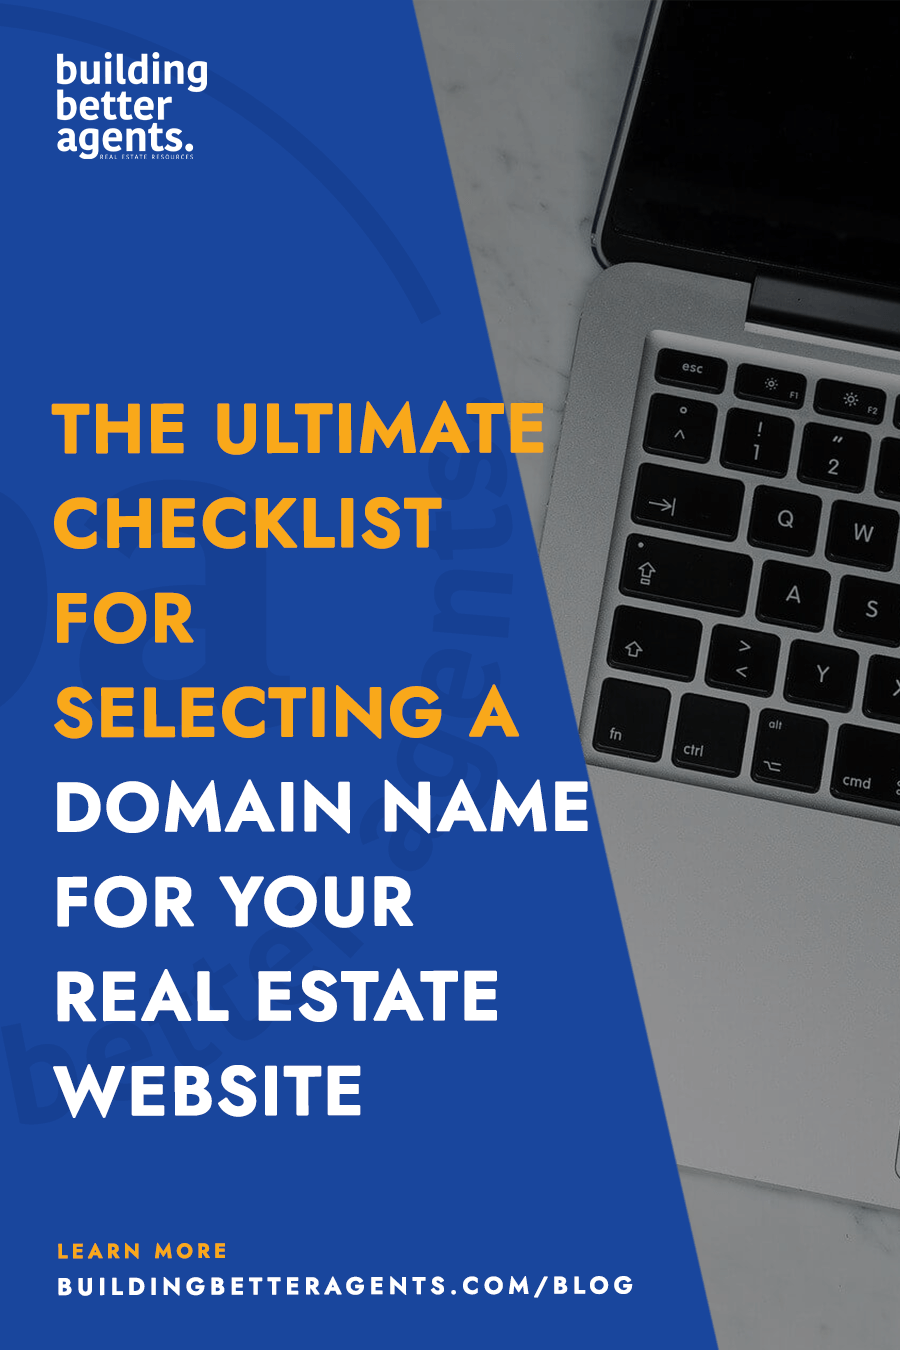 The Ultimate Checklist for Selecting a Domain Name for Your Real Estate Website